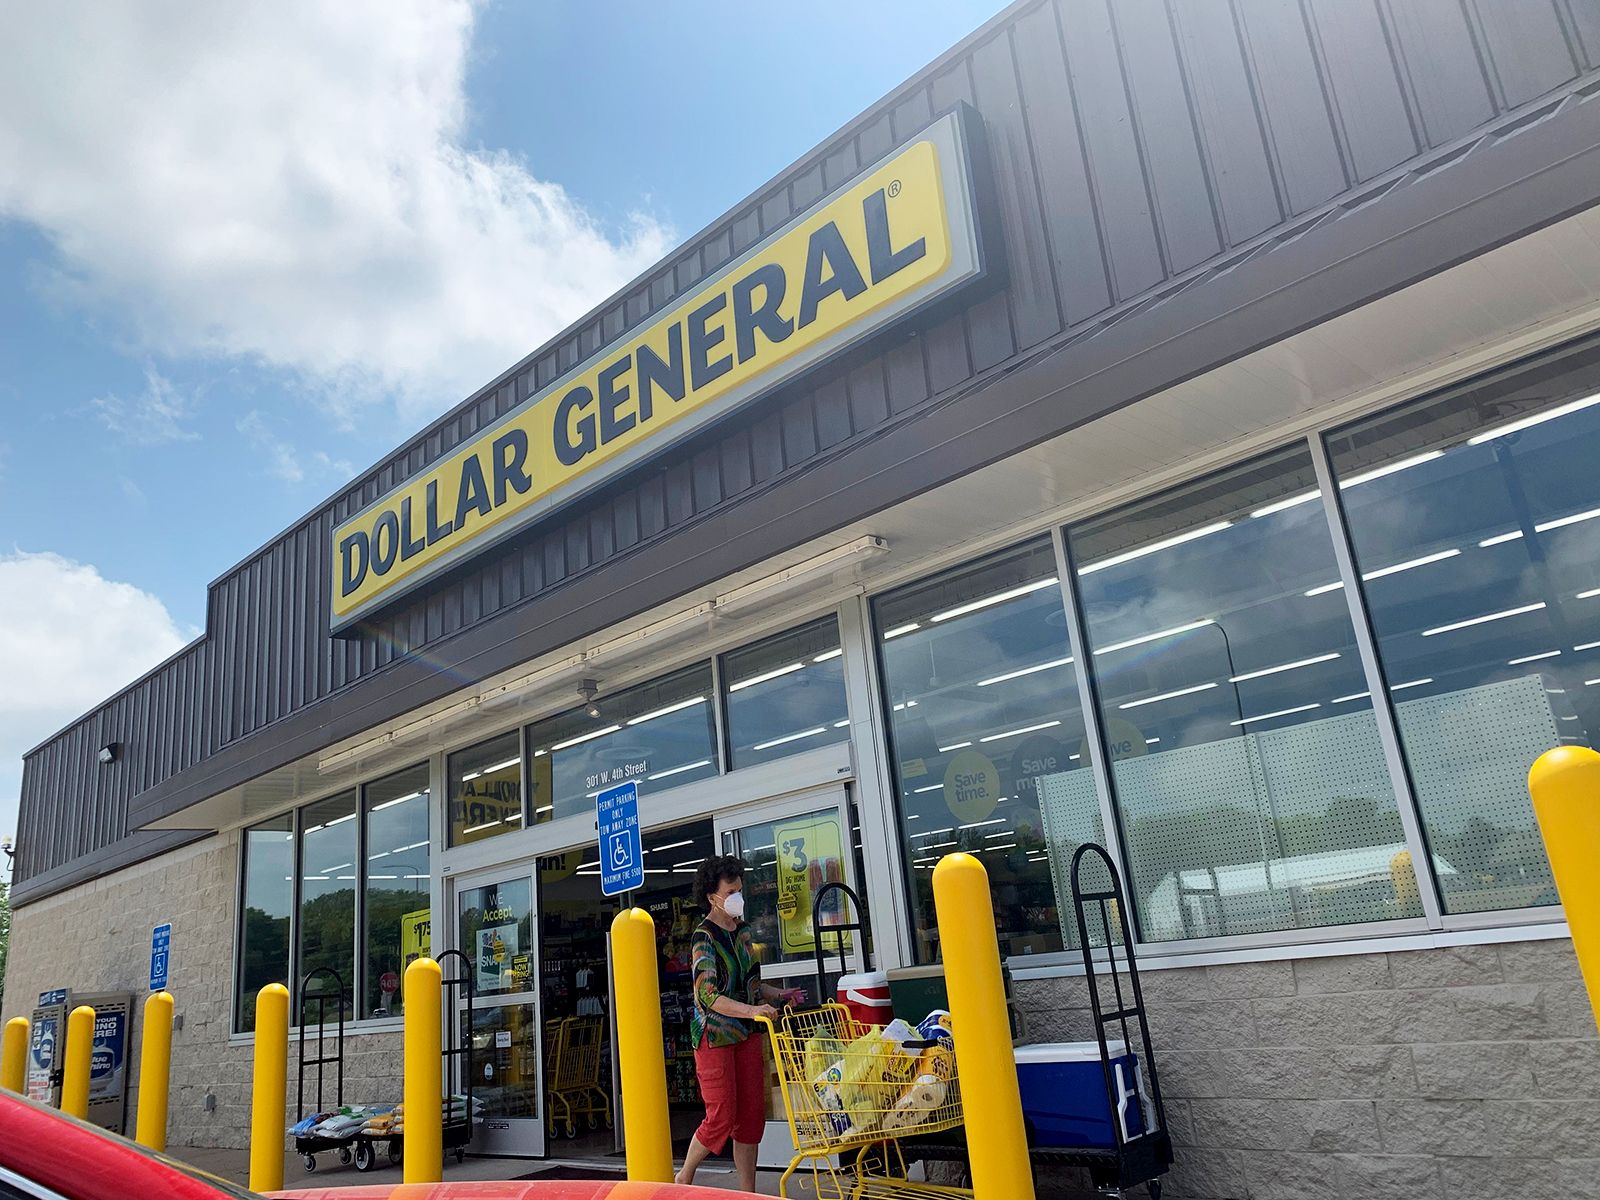 Dollar Tree, Dollar General and discount retailers opening more stores